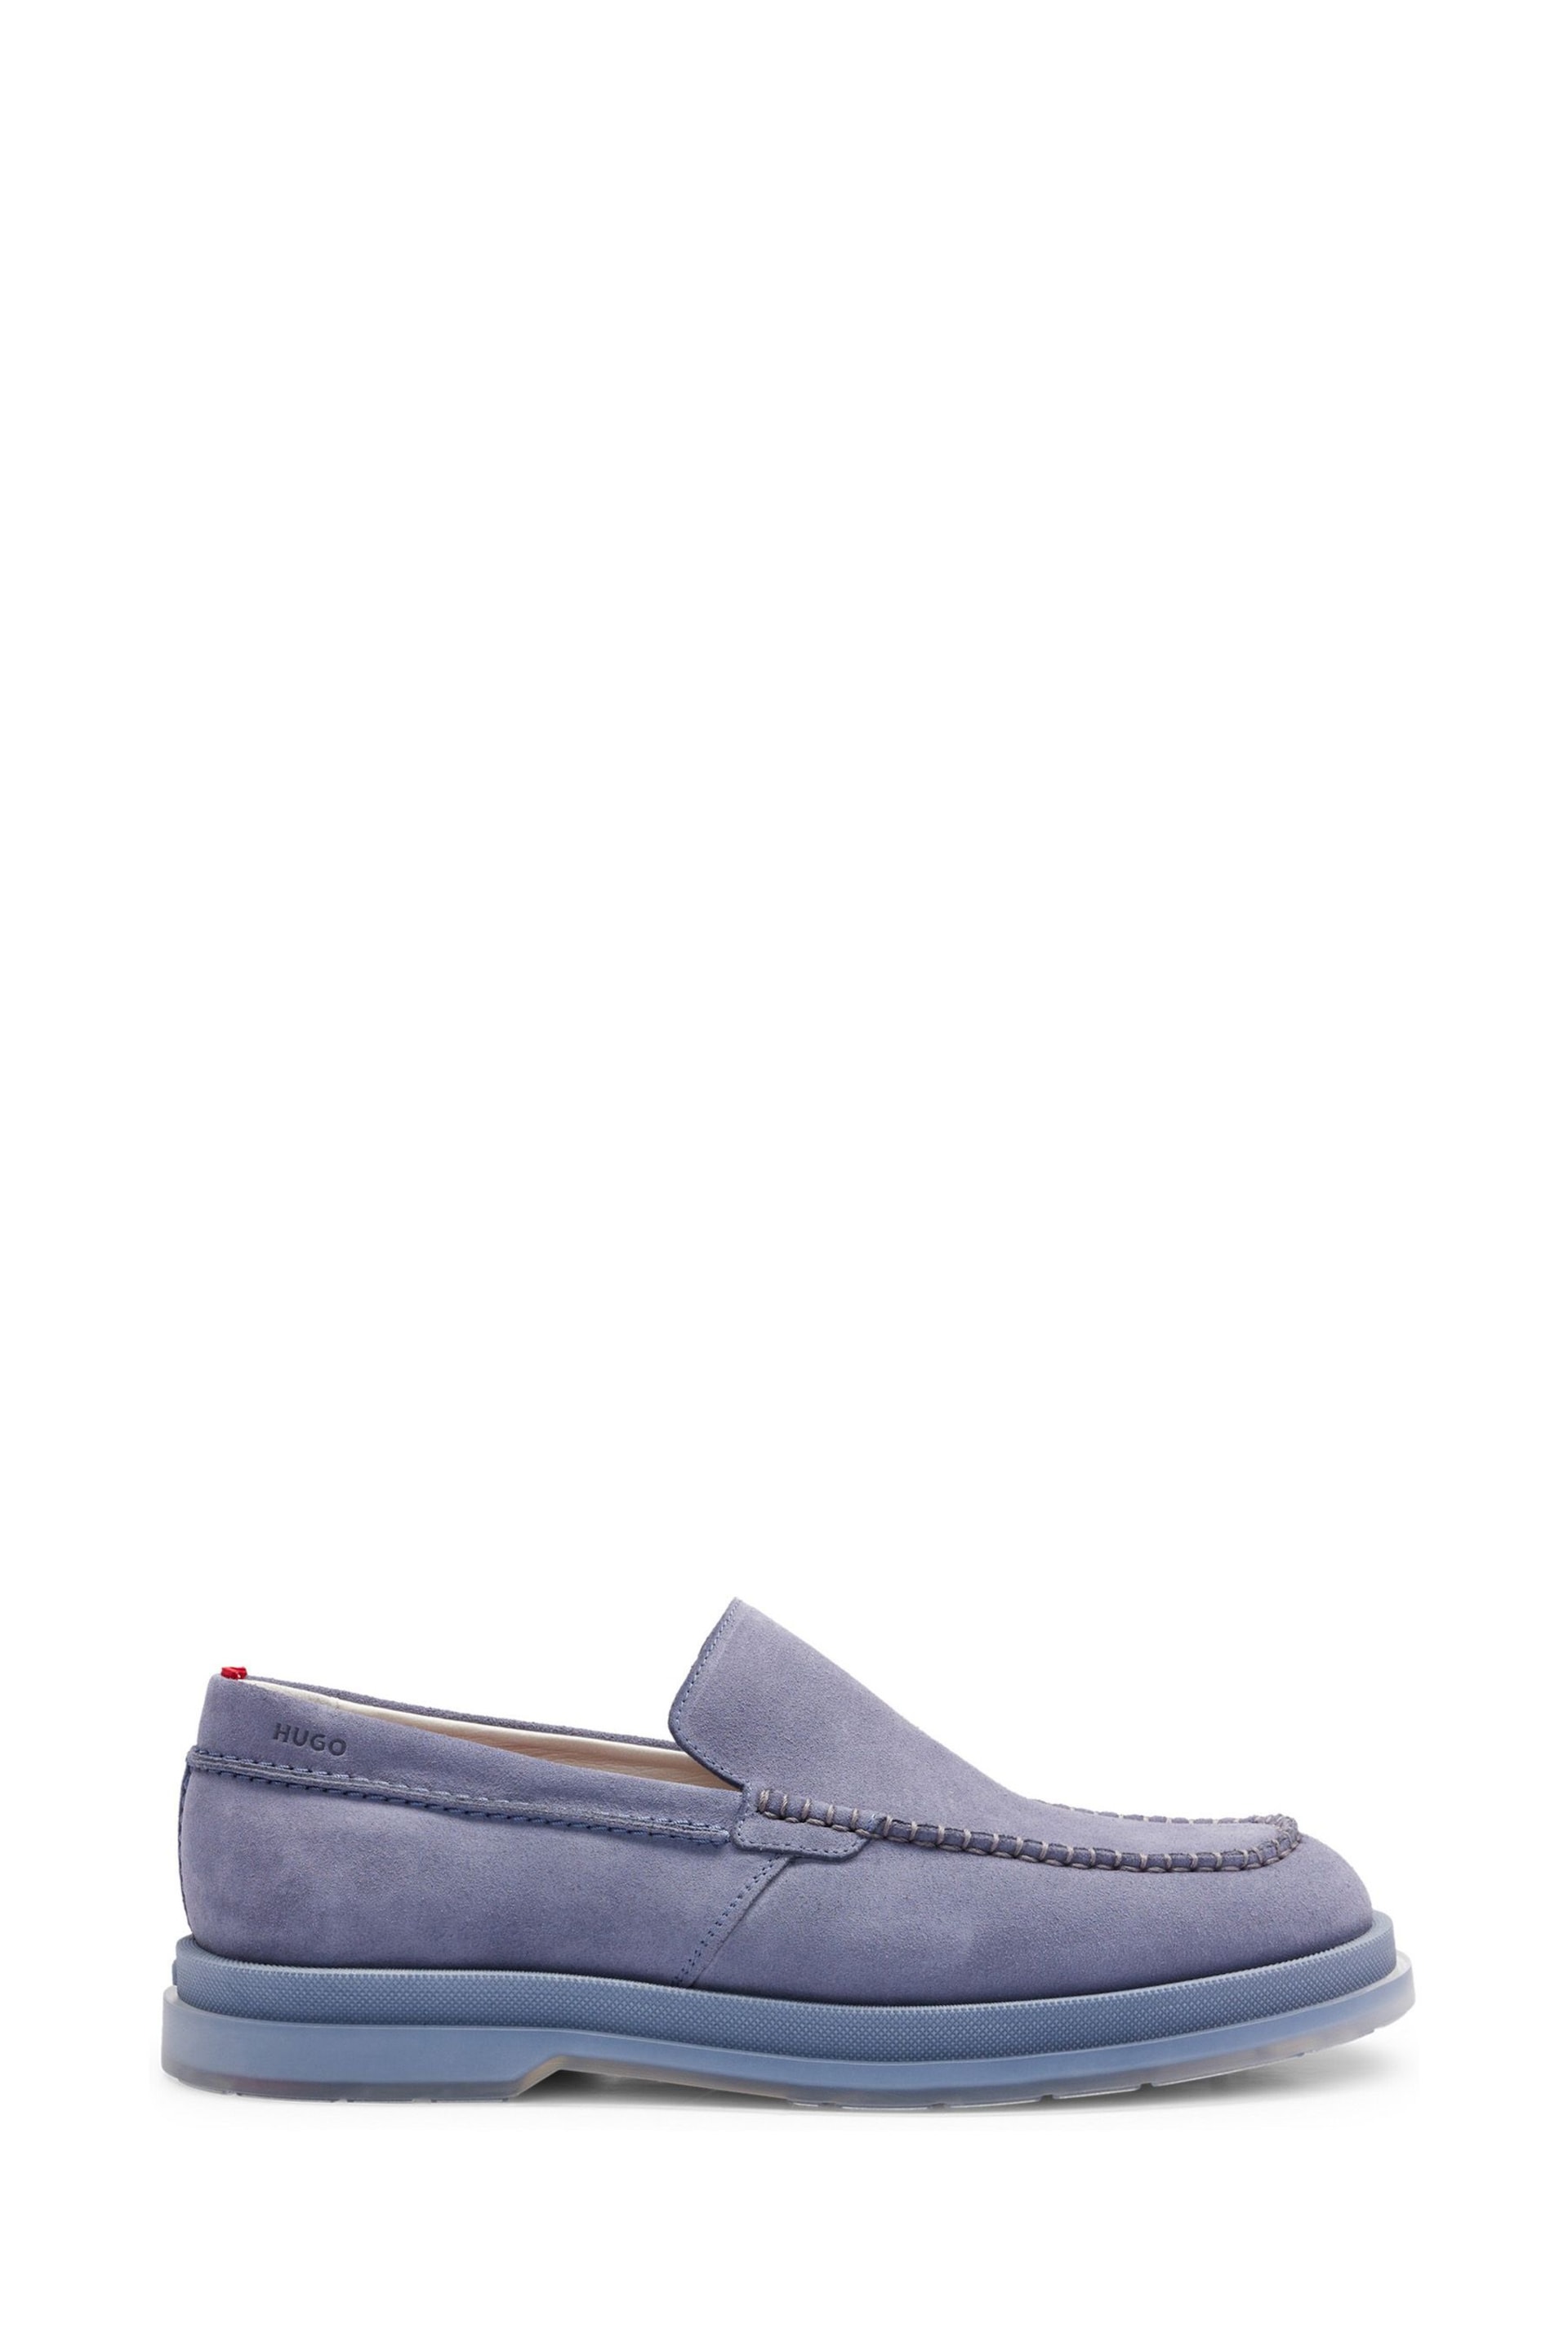 HUGO Suede Loafers - Image 1 of 5